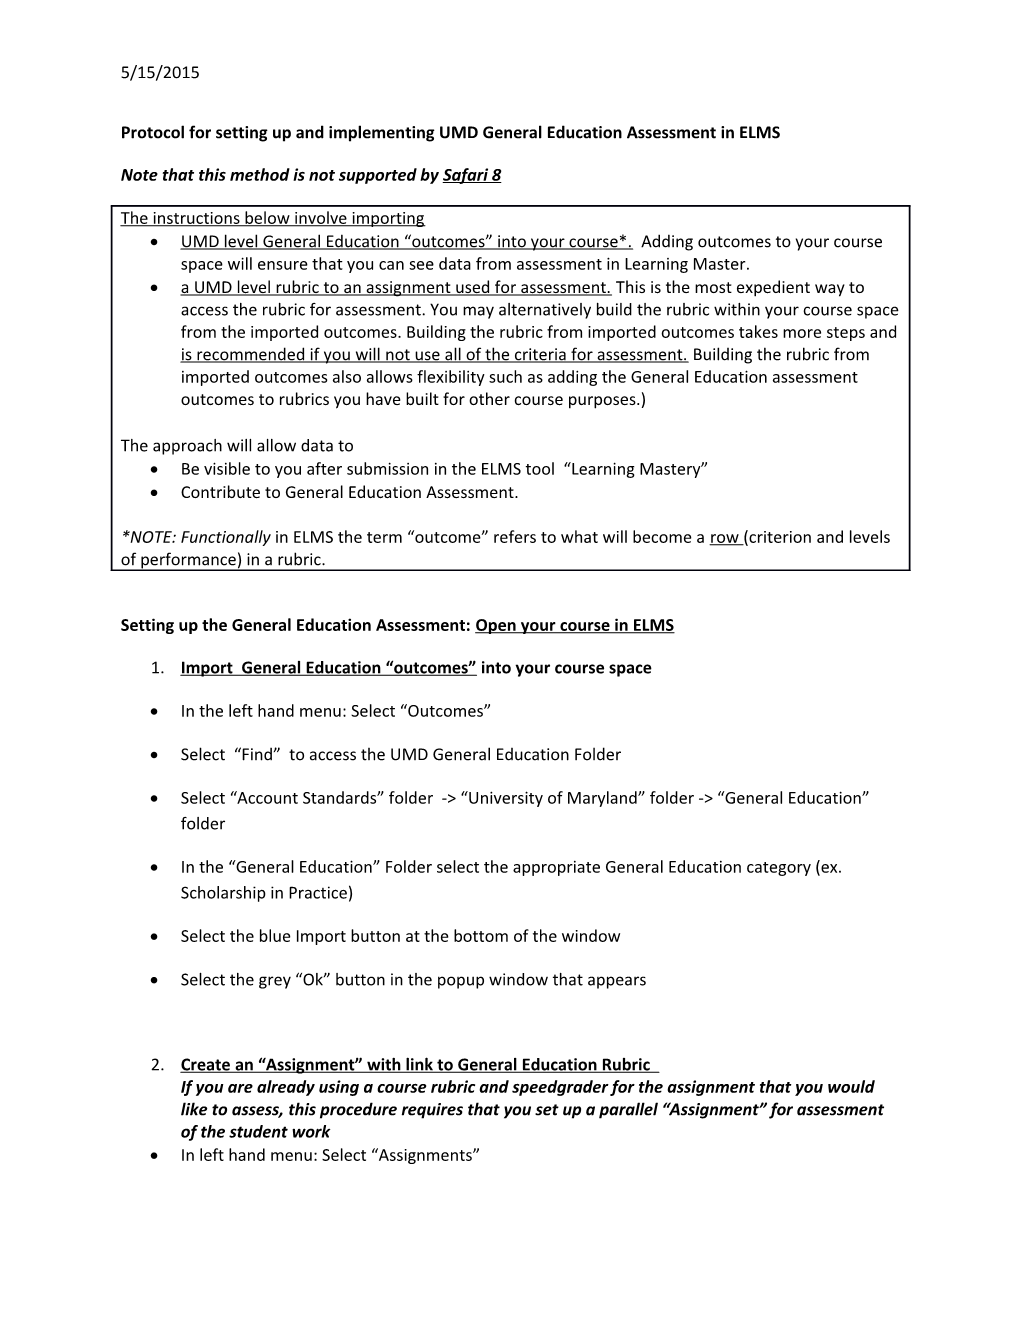 Protocol for Setting up and Implementing UMD General Education Assessment in ELMS